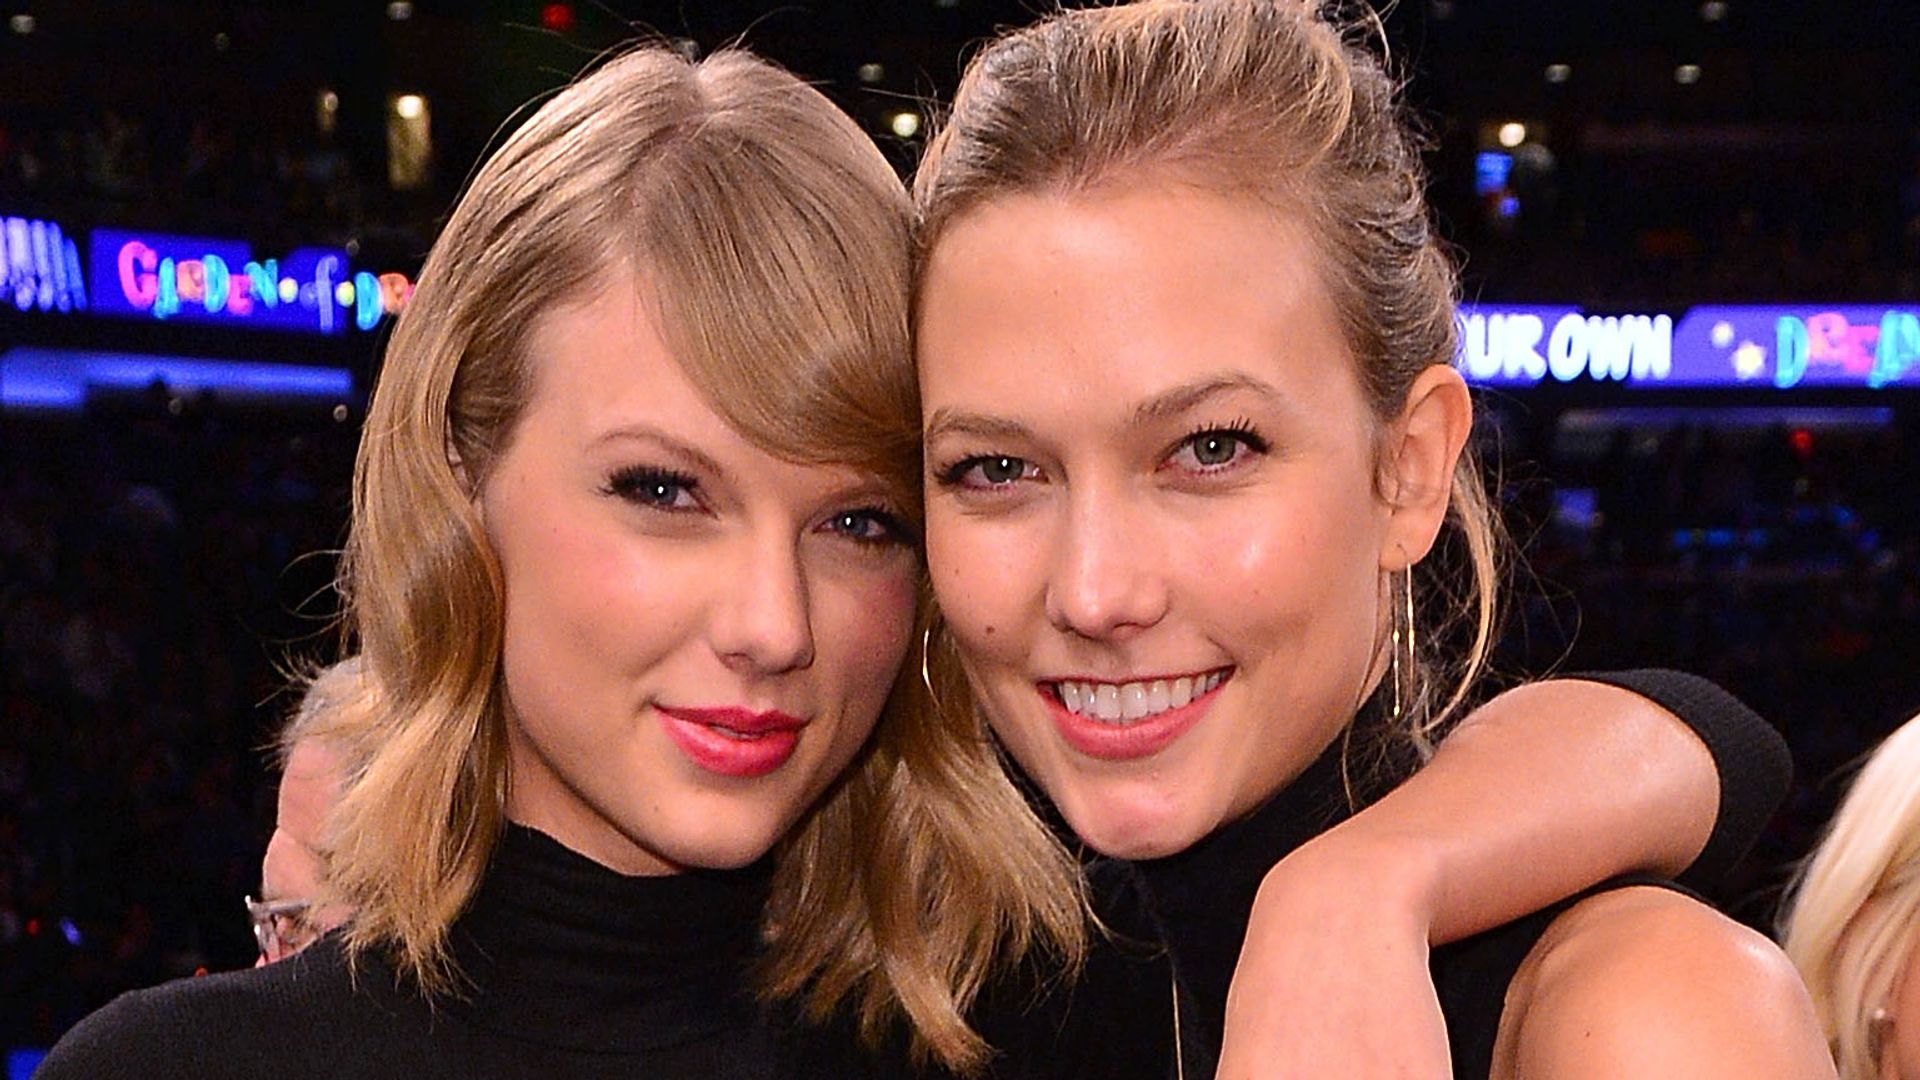 Taylor Swift and Karlie Kloss attend the Chicago Bulls vs New York Knicks game at Madison Square Garden on October 29, 2014 in New York City.  